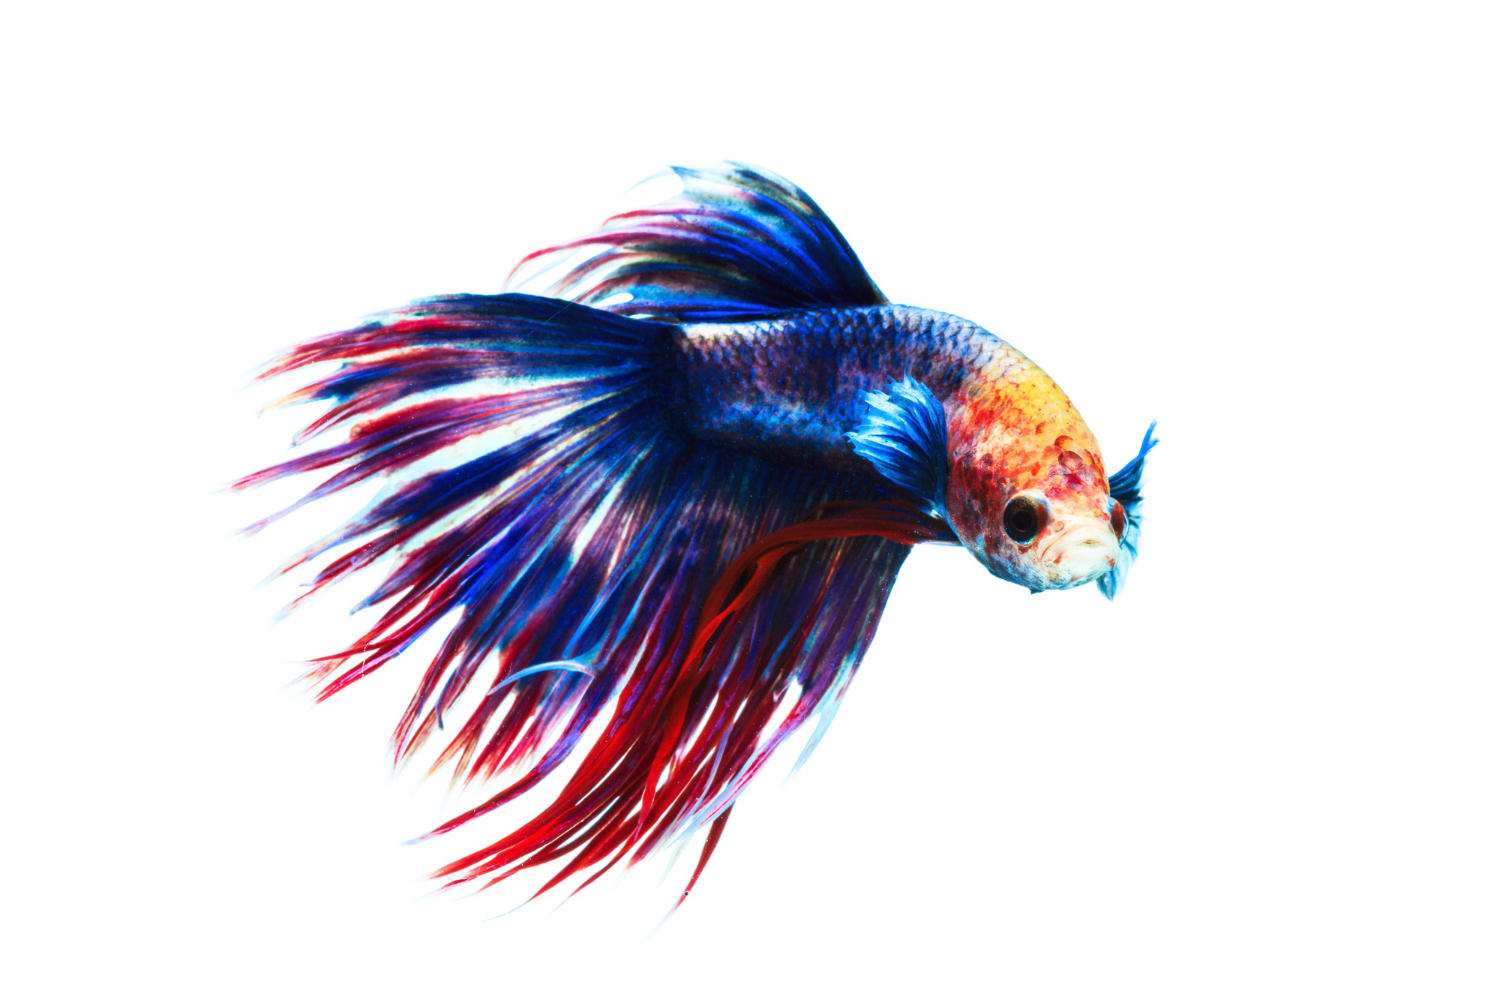 Betta Fish 101: Recommended Books and Websites for Beginners